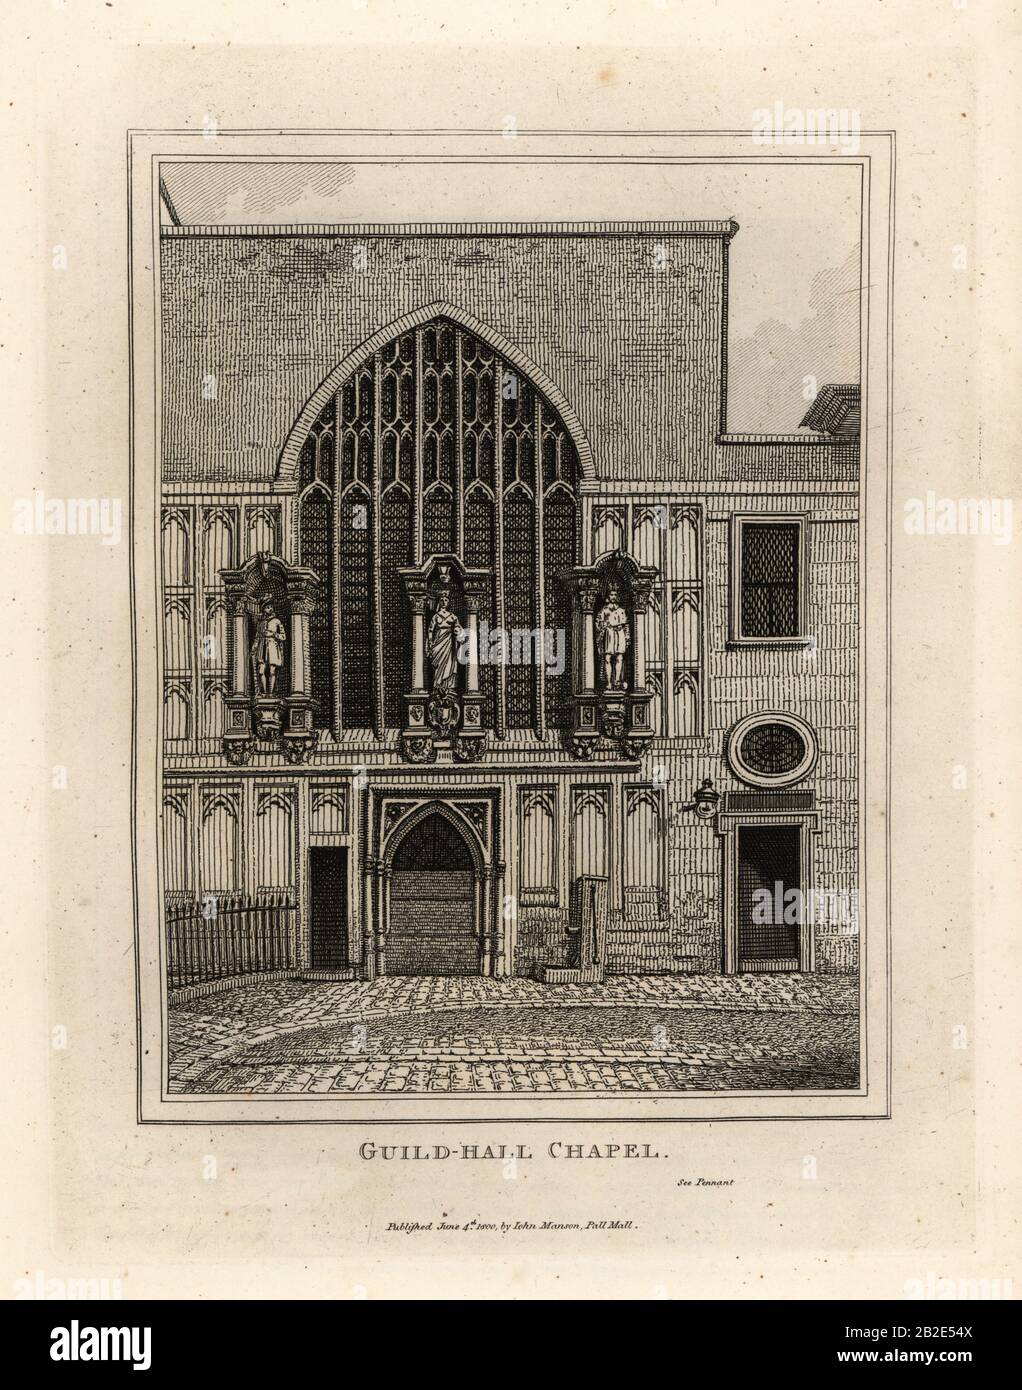 Guild-hall Chapel, rebuilt in 1440, part of the 12th century Guildhall in London. Copperplate engraving by John Thomas Smith after original drawings by members of the Society of Antiquaries from his J.T. Smith’s Antiquities of London and its Environs, J. Sewell, R. Folder, J. Simco, London, 1791. Stock Photo